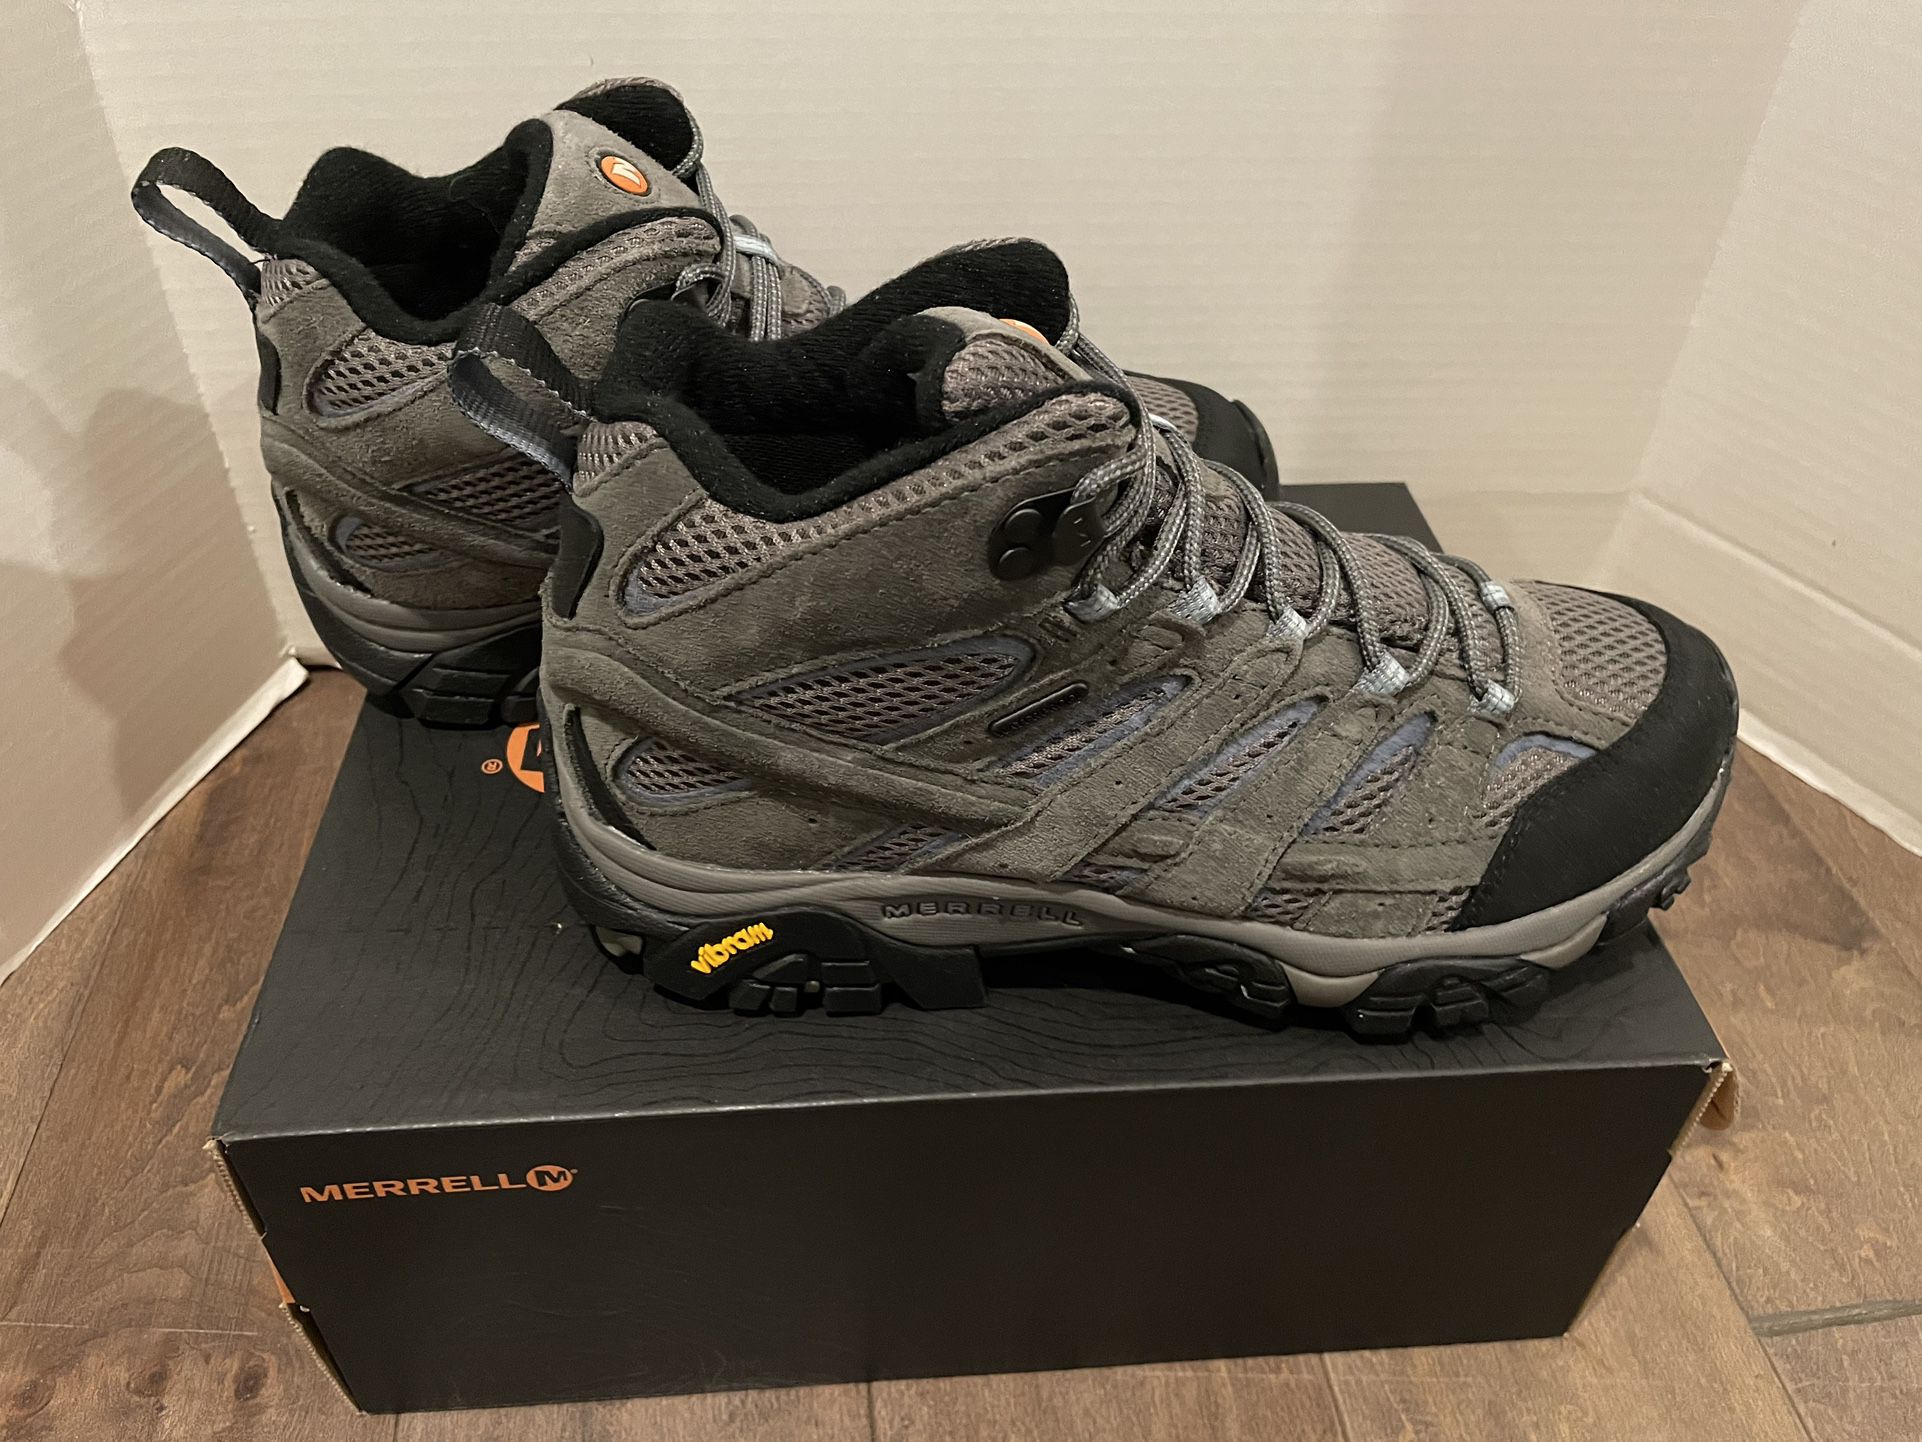 Merrell Women's Moab 2 Mid Waterproof Hiking Boots size 10 brand new 